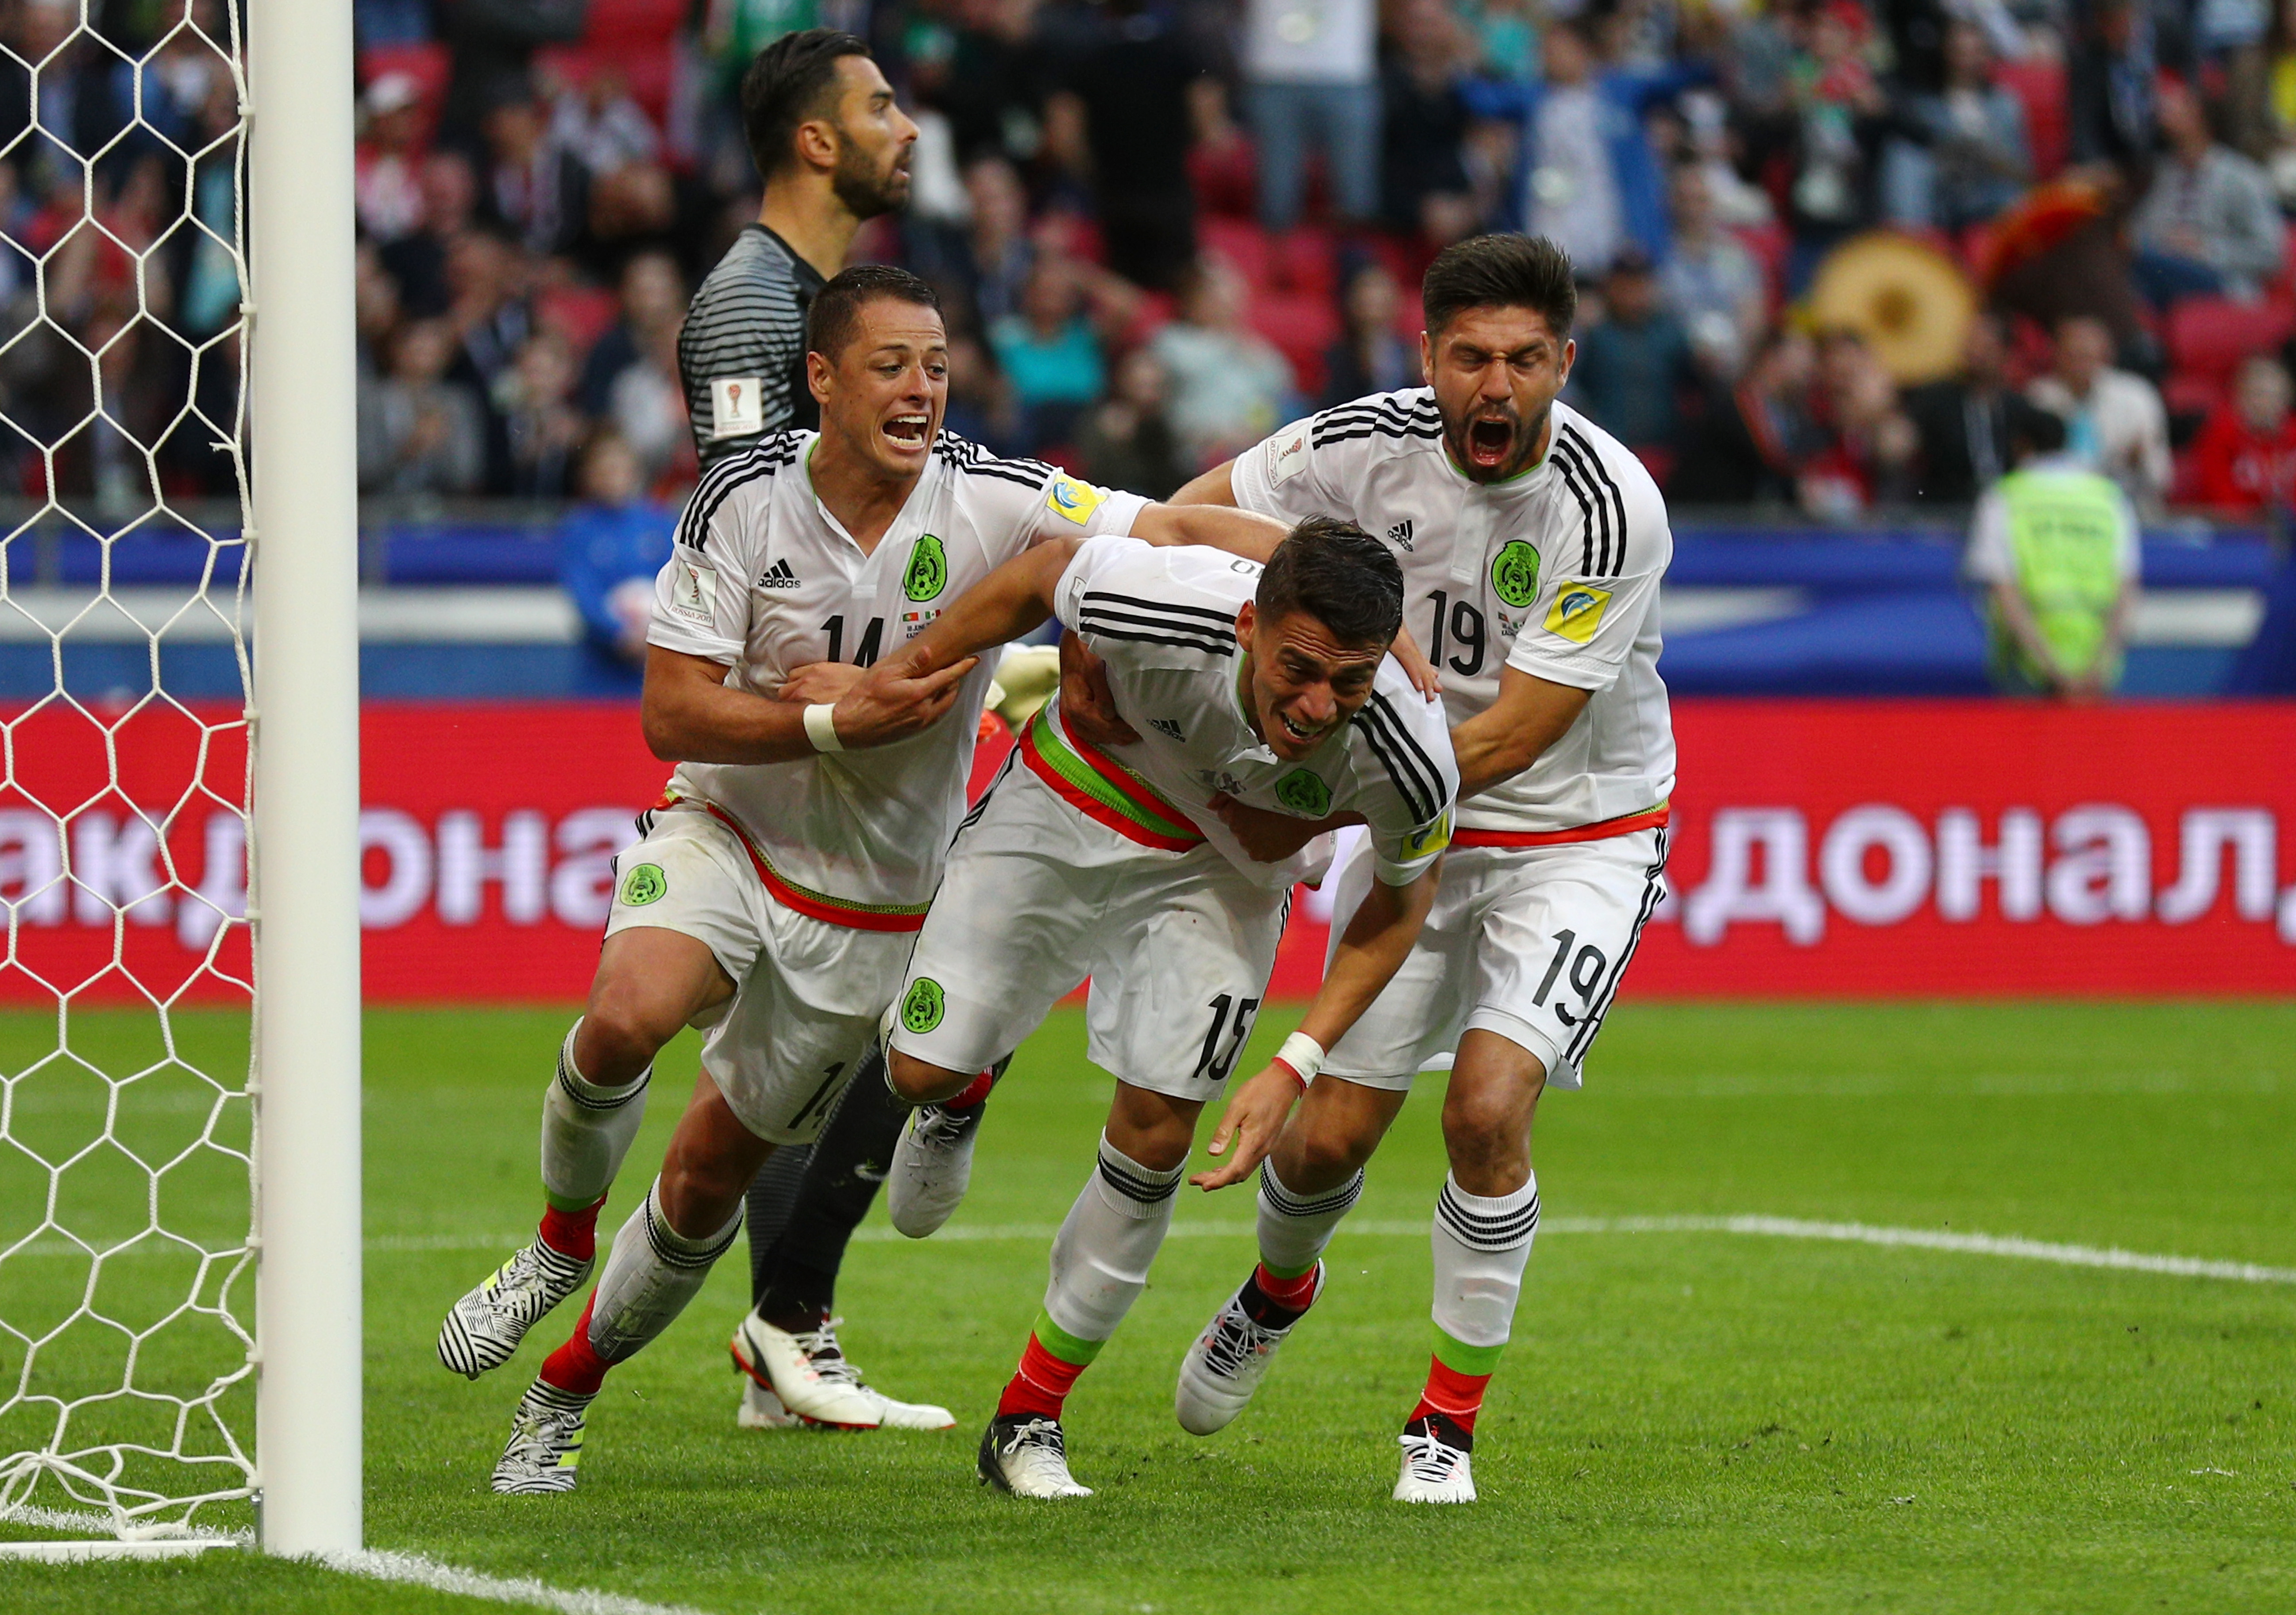 Confederations Cup | Portugal hold Mexico to a 2-2 draw while Chile beat Cameroon